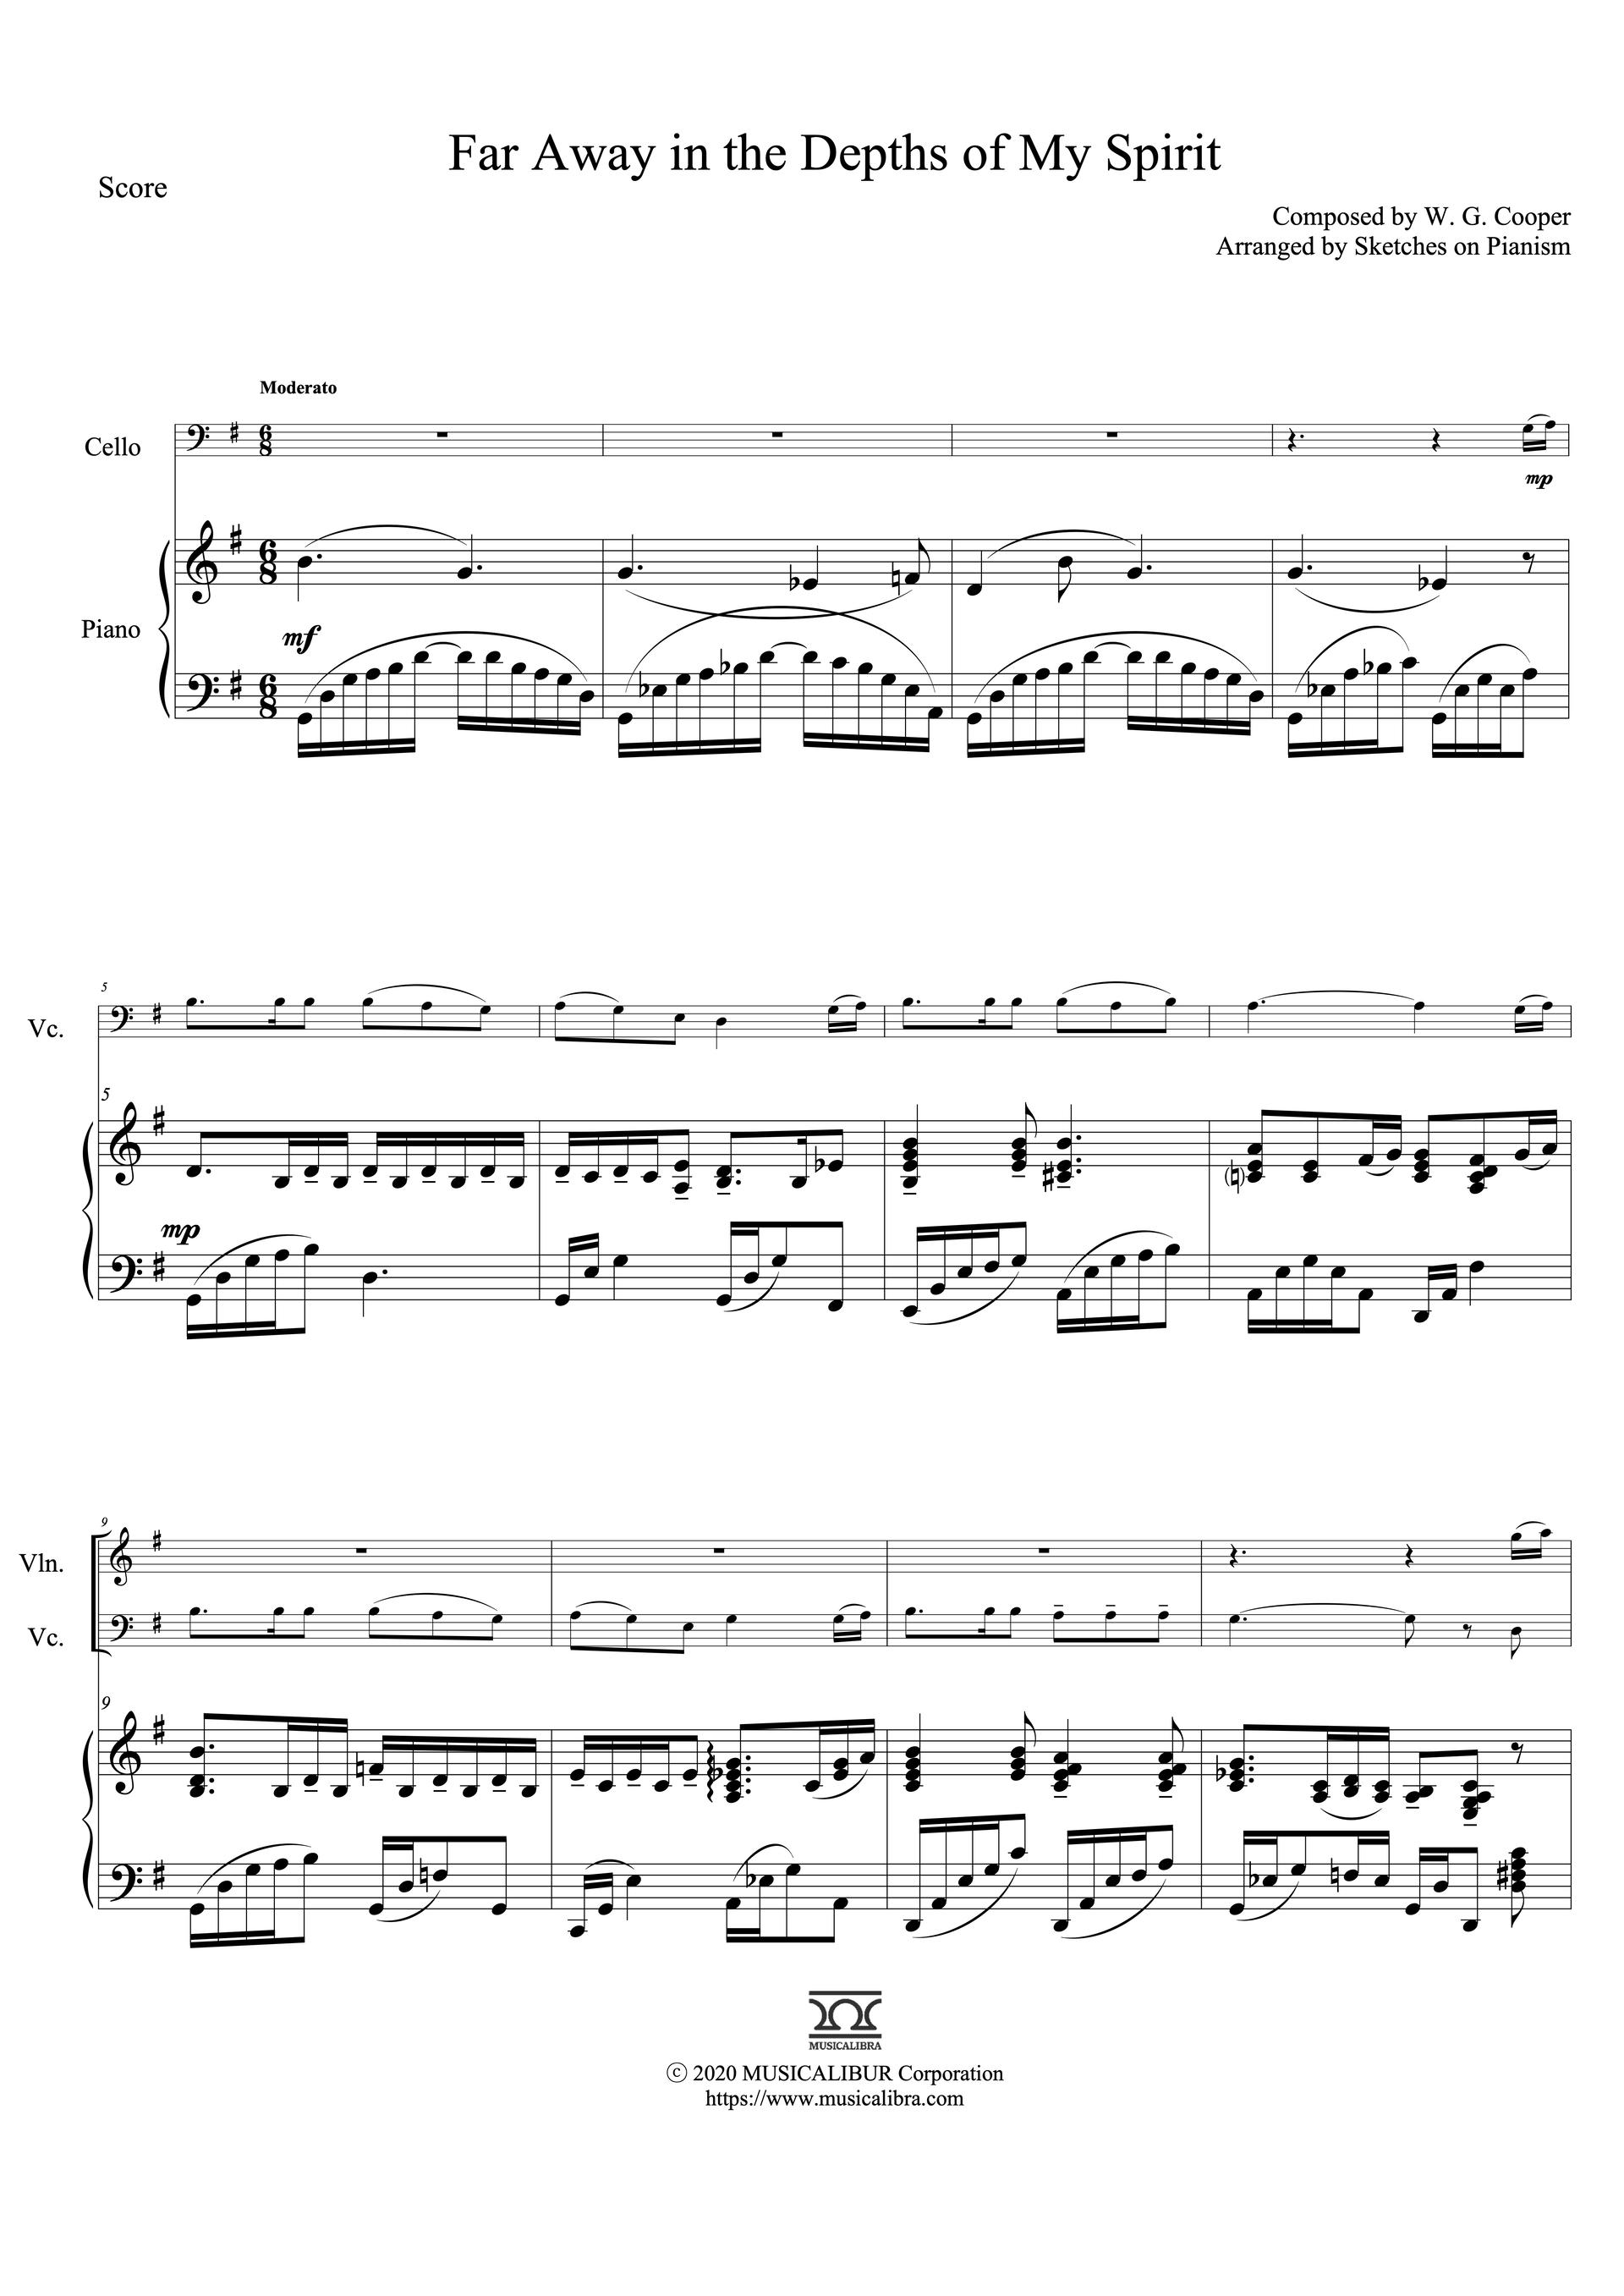 Sheet music of Far Away in the Depths of My Spirit arranged for violin, cello and piano trio preview page 1